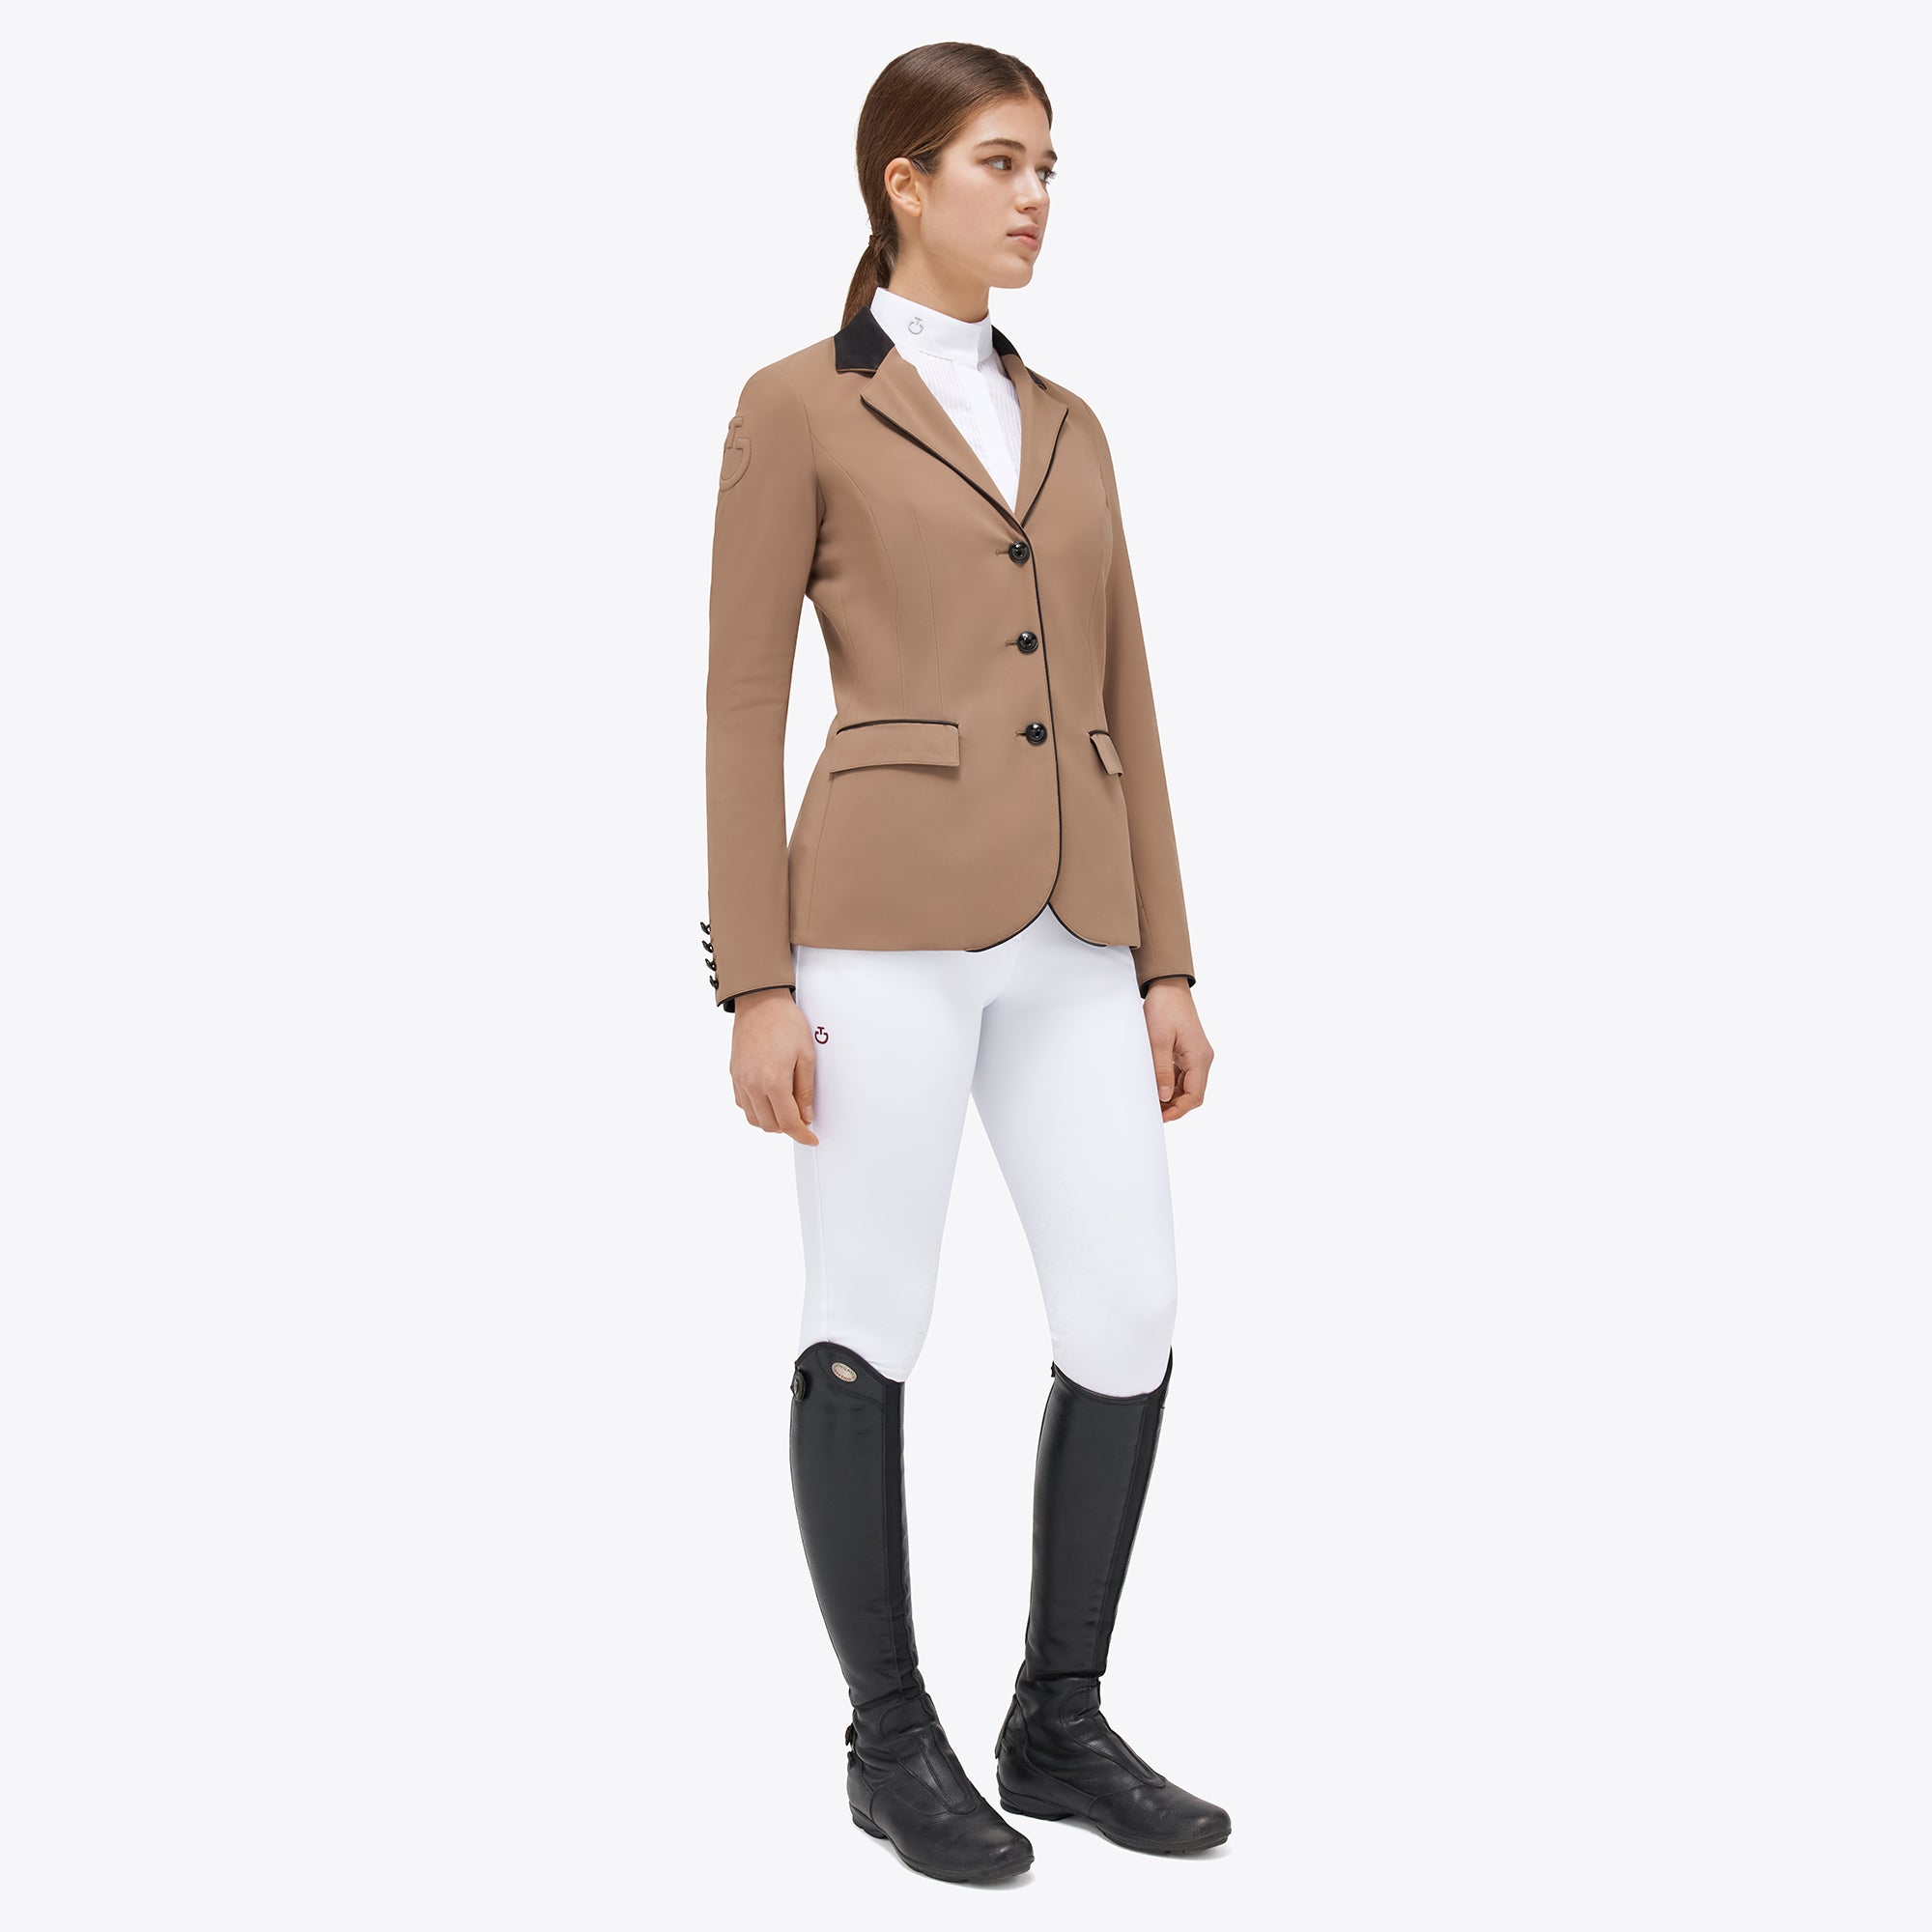 WOMEN'S COMPETITION RIDING JACKET